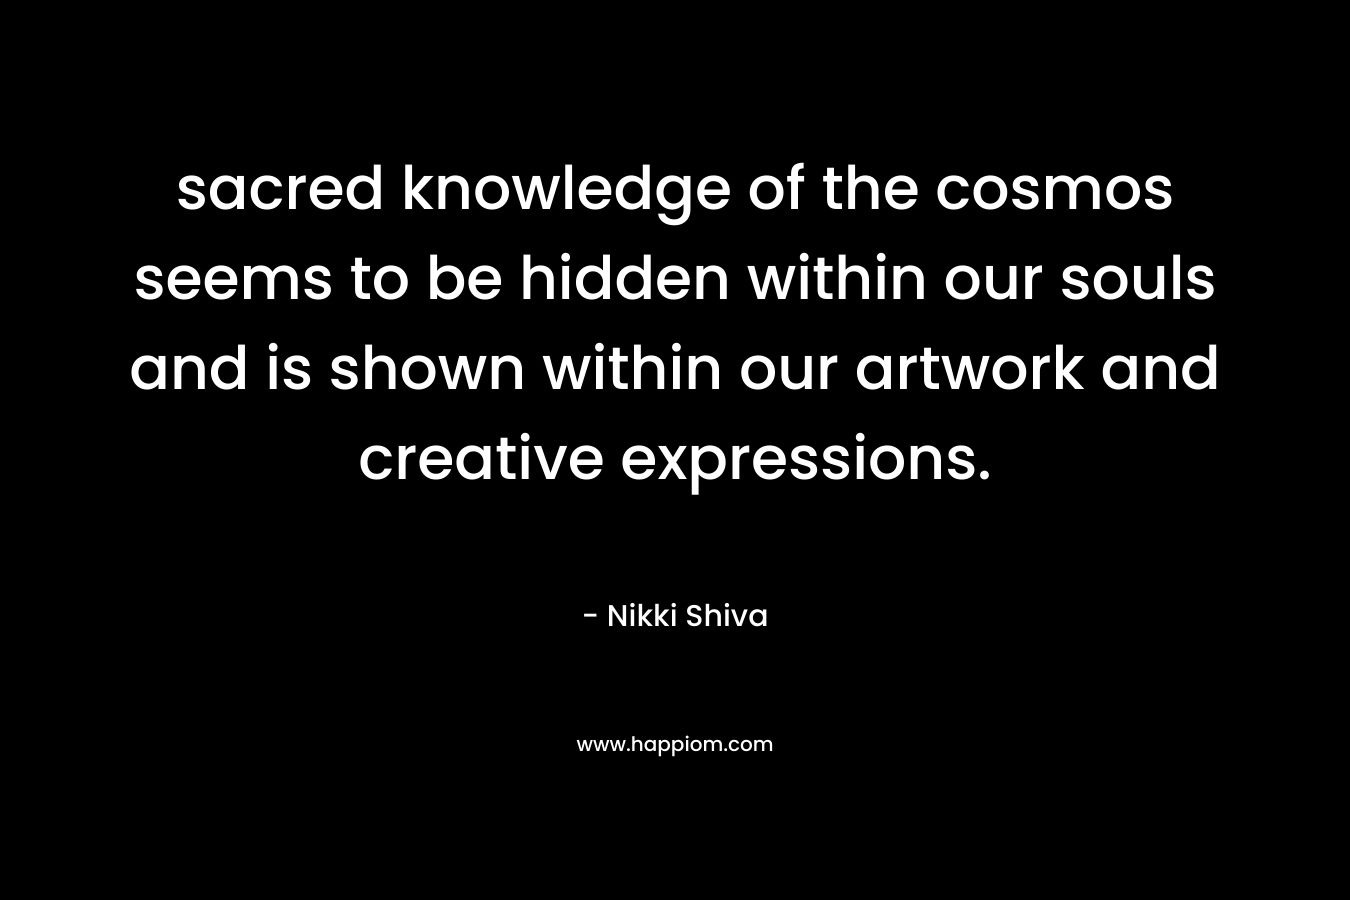 sacred knowledge of the cosmos seems to be hidden within our souls and is shown within our artwork and creative expressions.